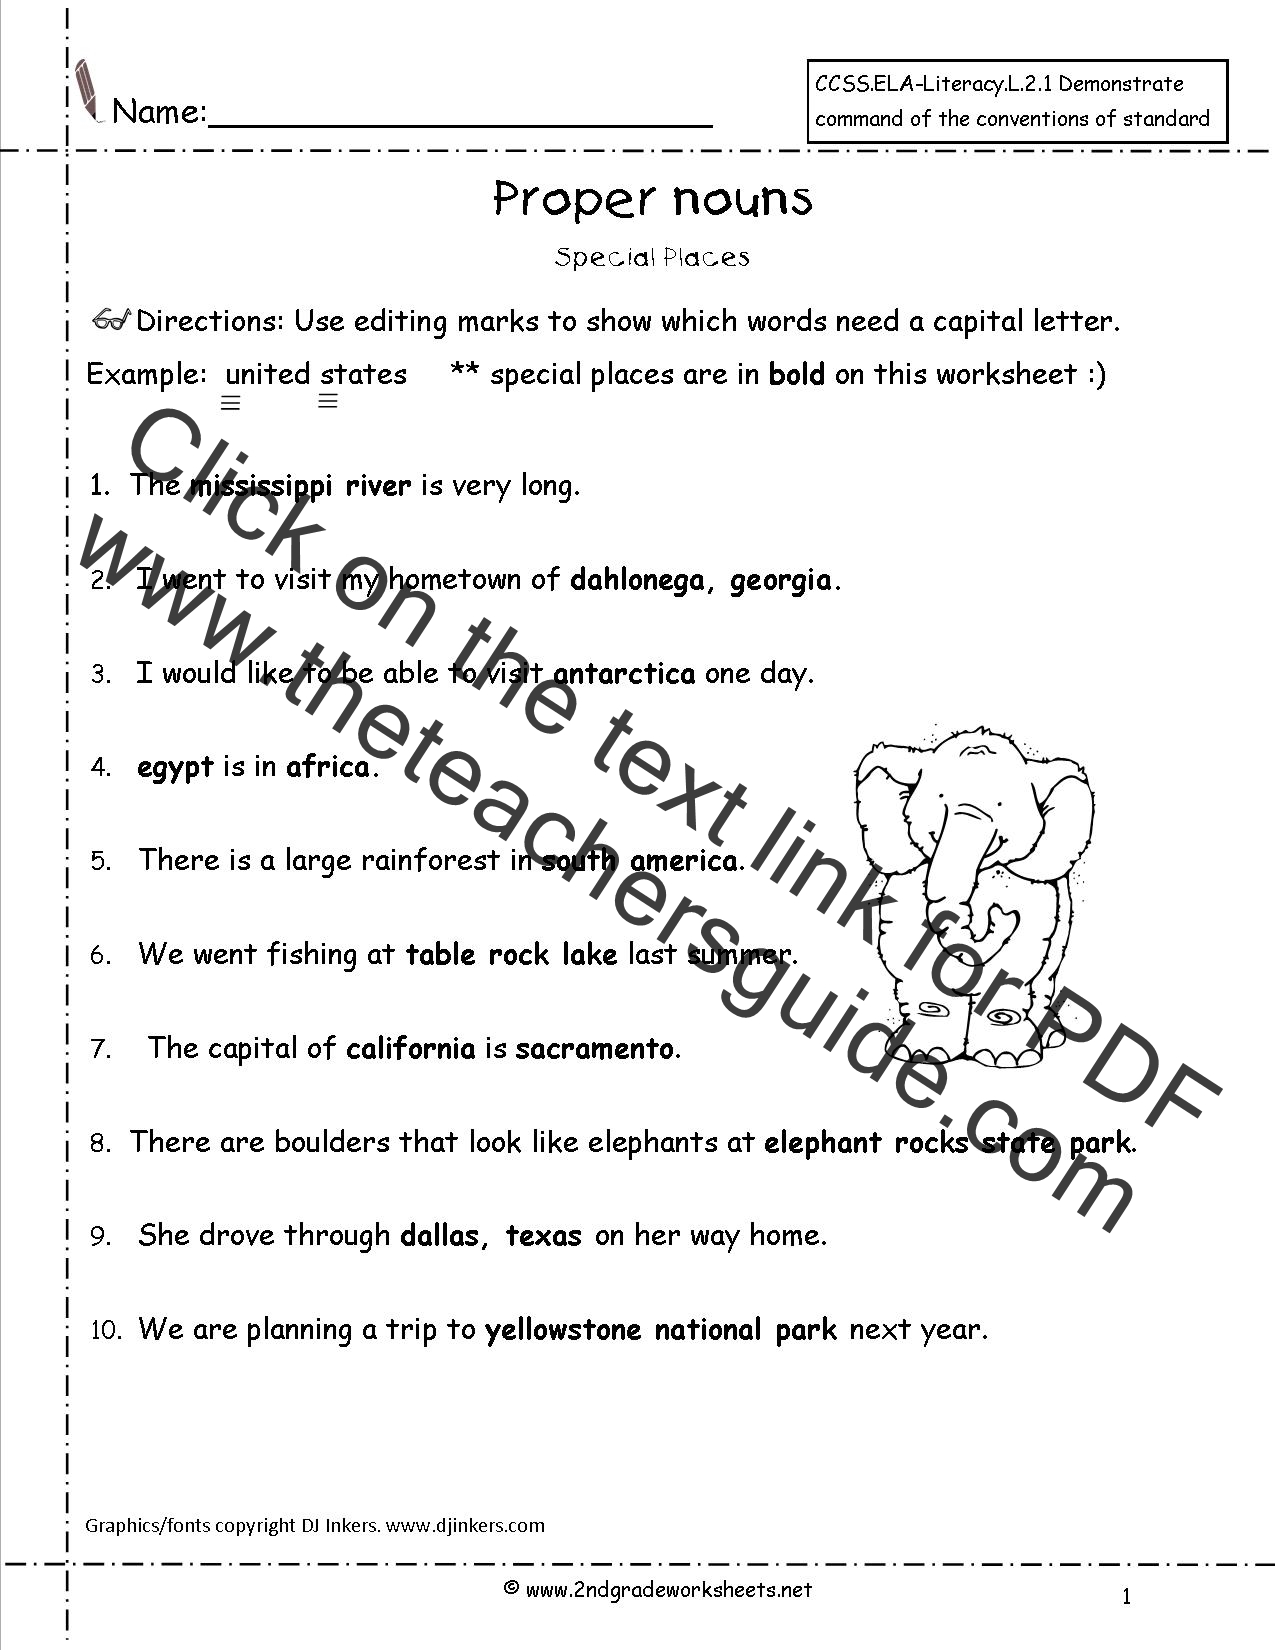 common-and-proper-nouns-worksheets-from-the-teacher-s-guide